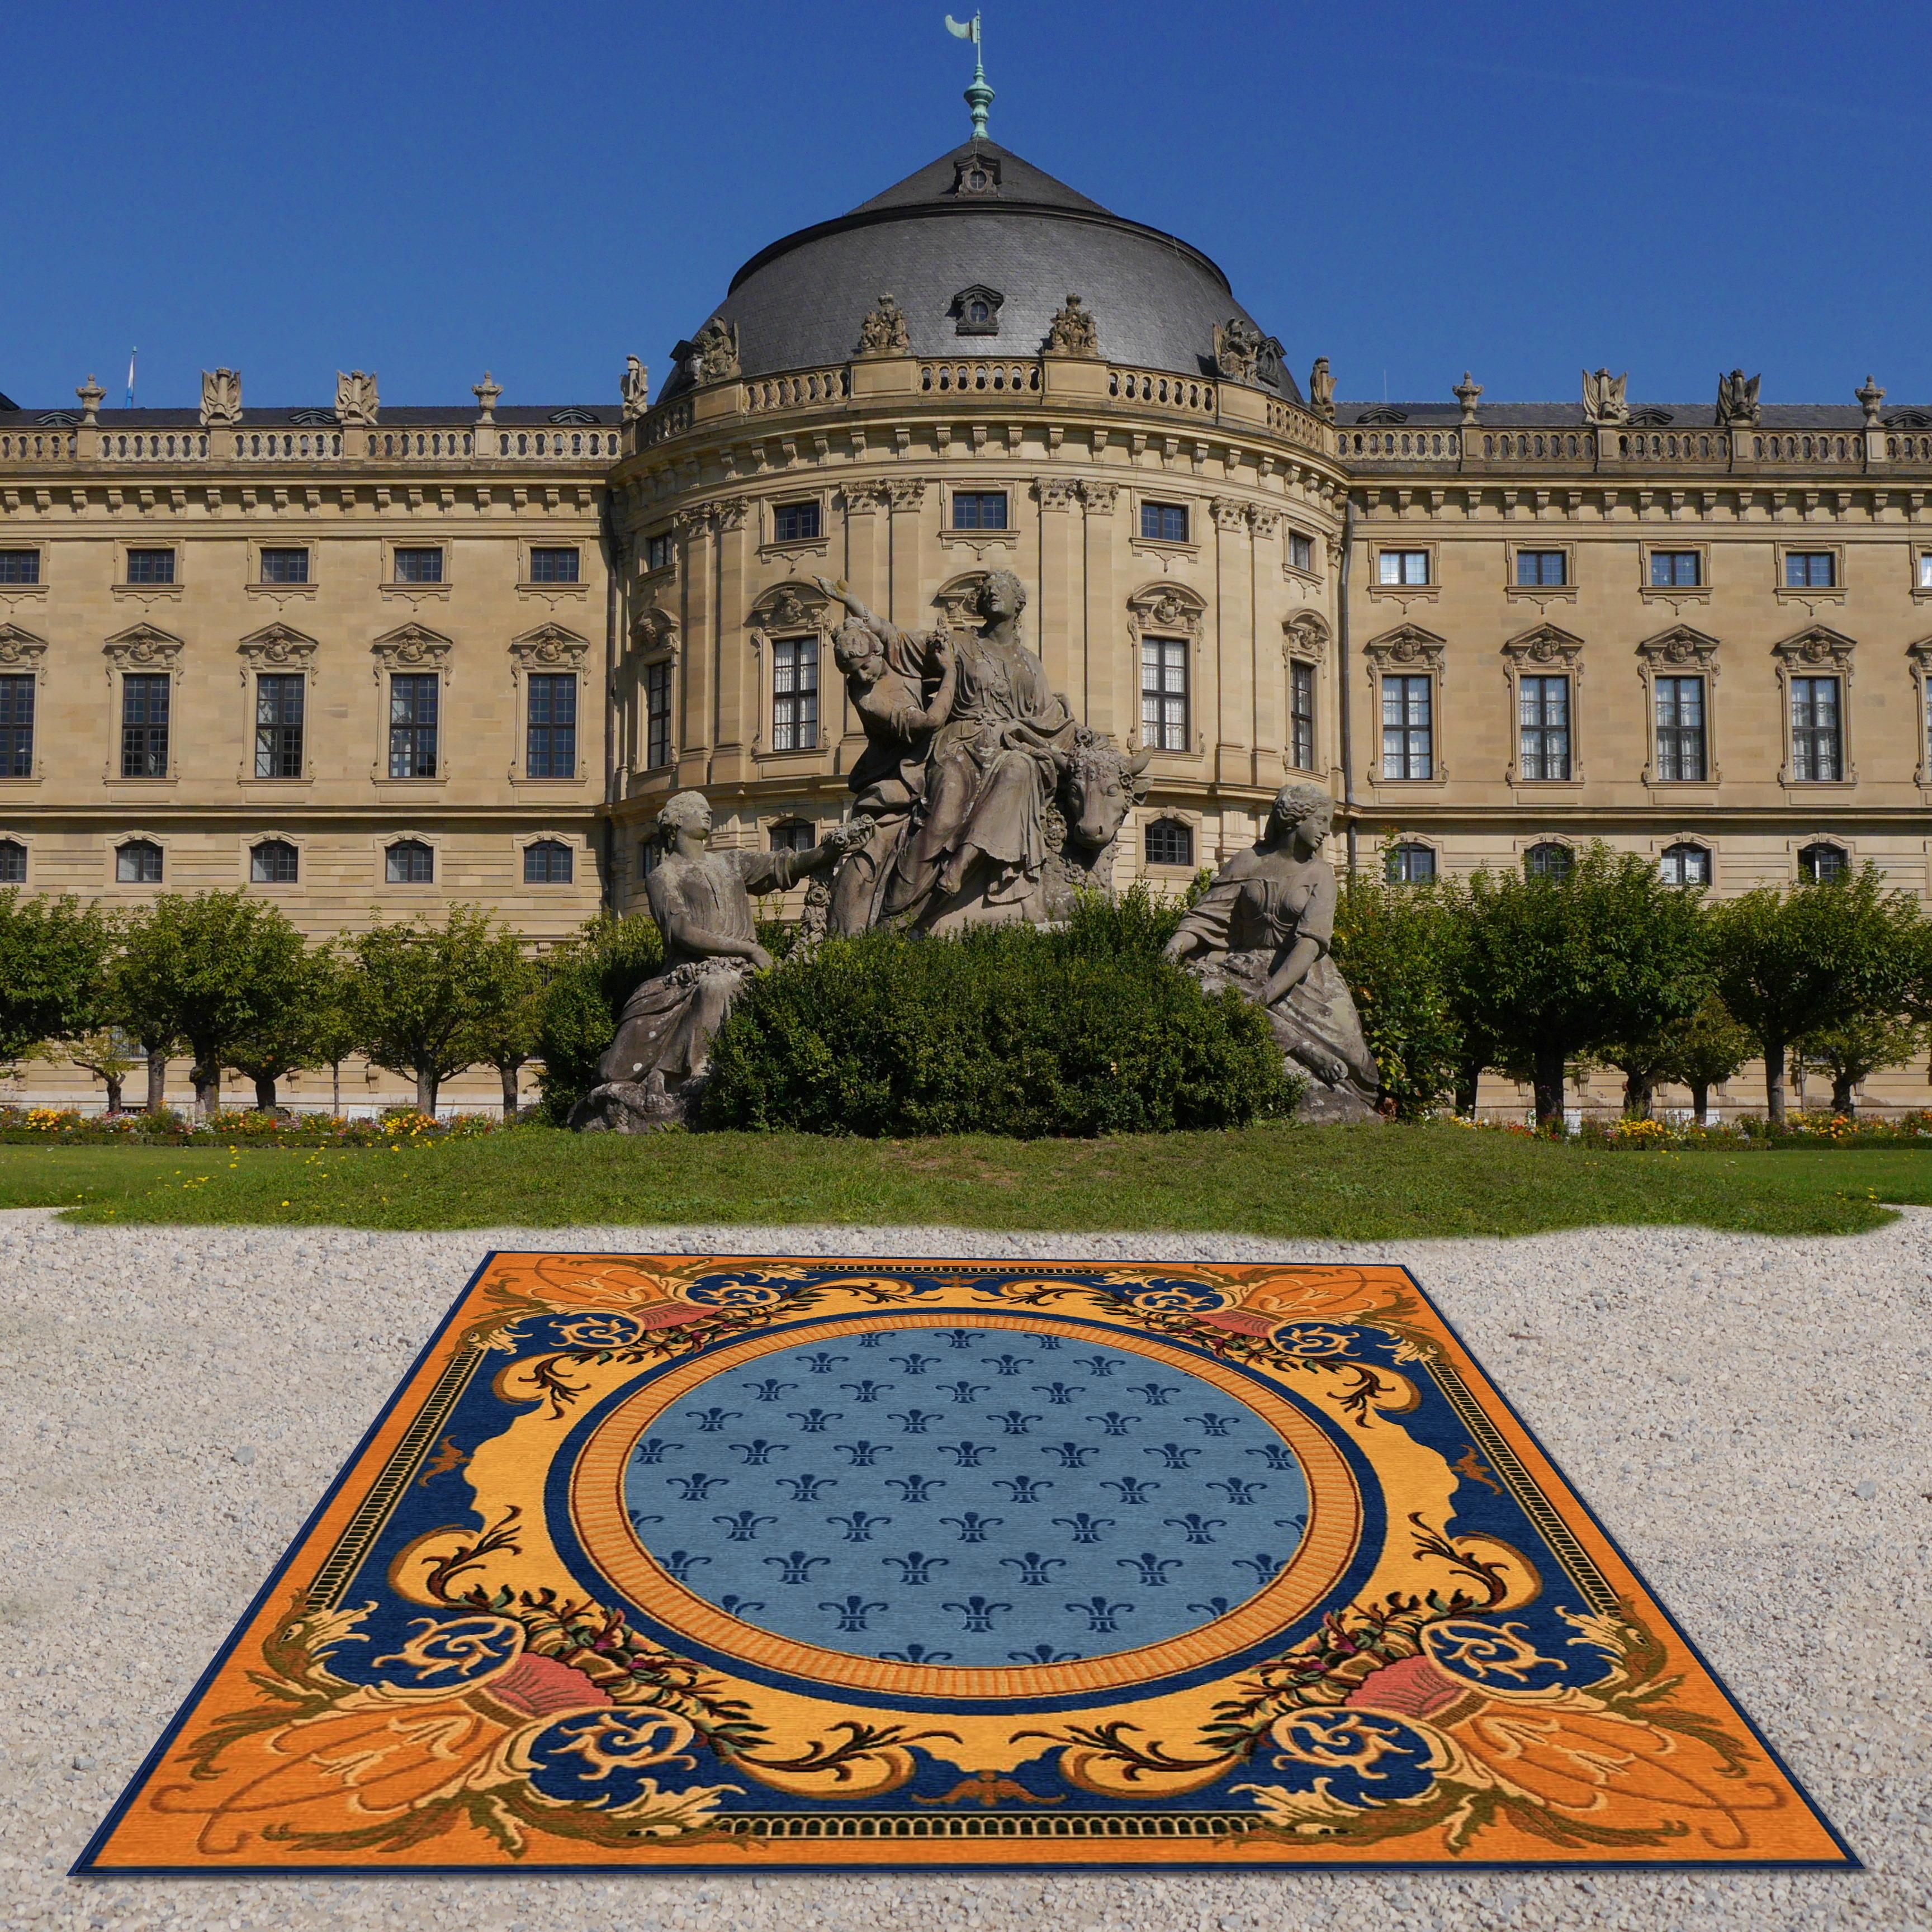 This neoclassical rug is showing a typical 1920´s Spanish style.
We produce these rugs on order in requested size and color. The color combinations can be defined by RAL or Pantone color charts.
The rug is produced in Tibetan highland wool. Size